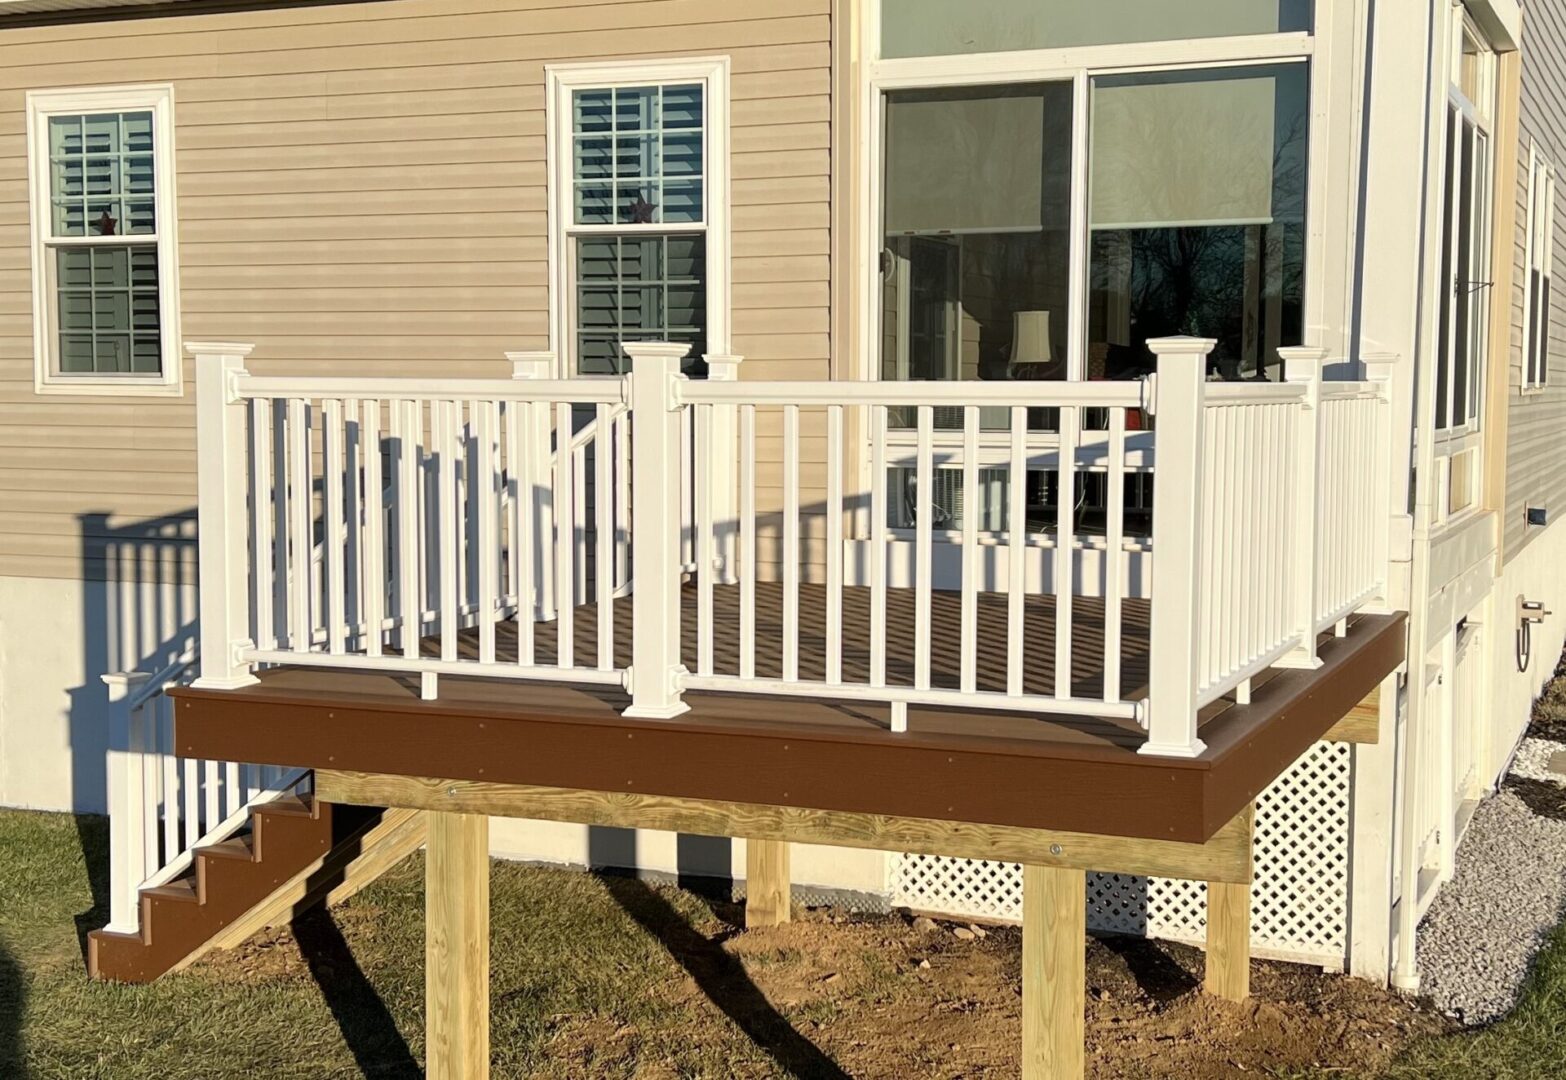 A deck with a bench and railing in the back yard.